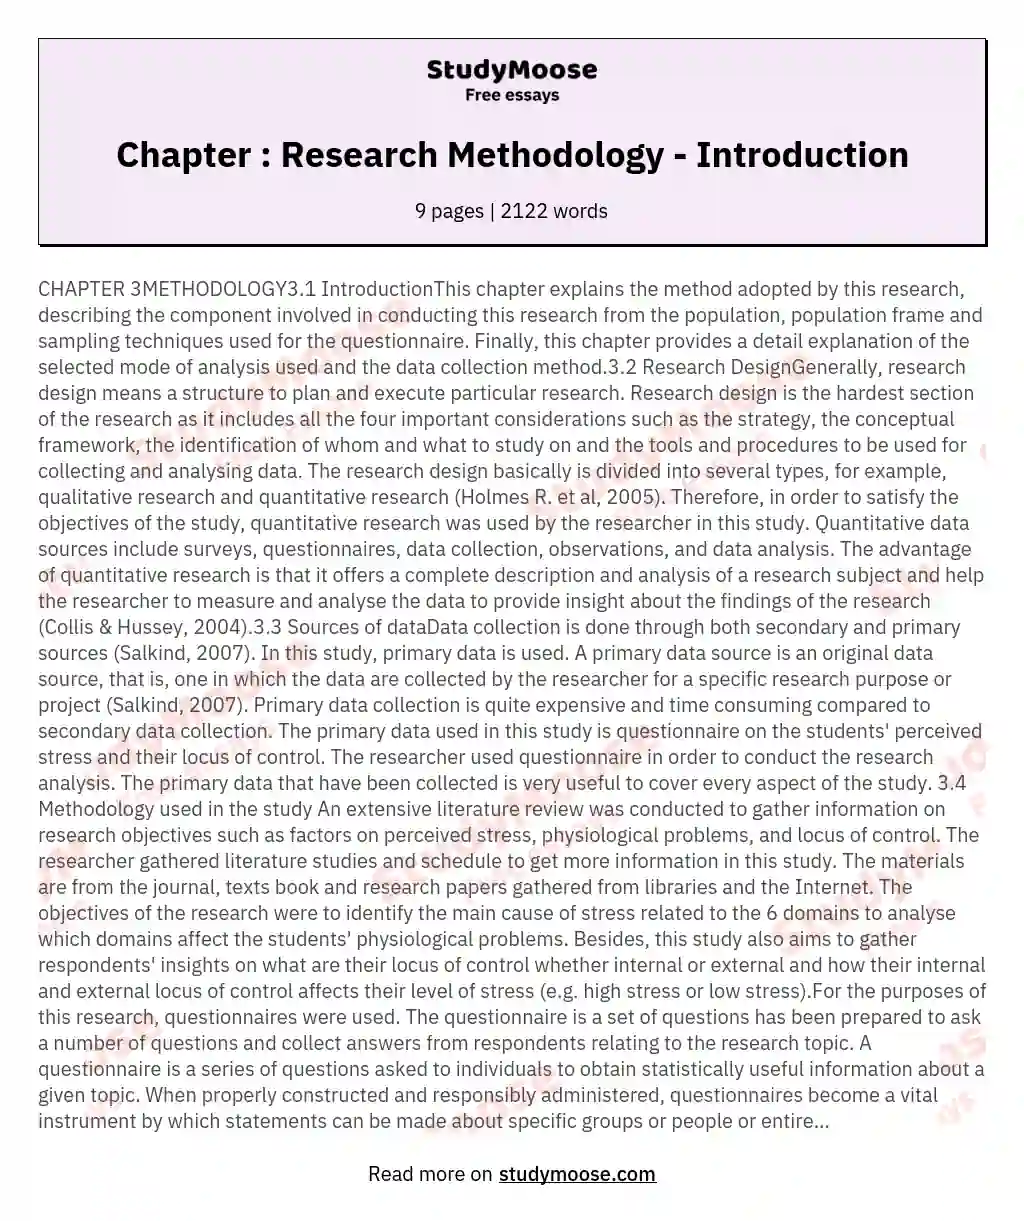 CHAPTER 3METHODOLOGY31 IntroductionThis chapter explains the method adopted by this research describing